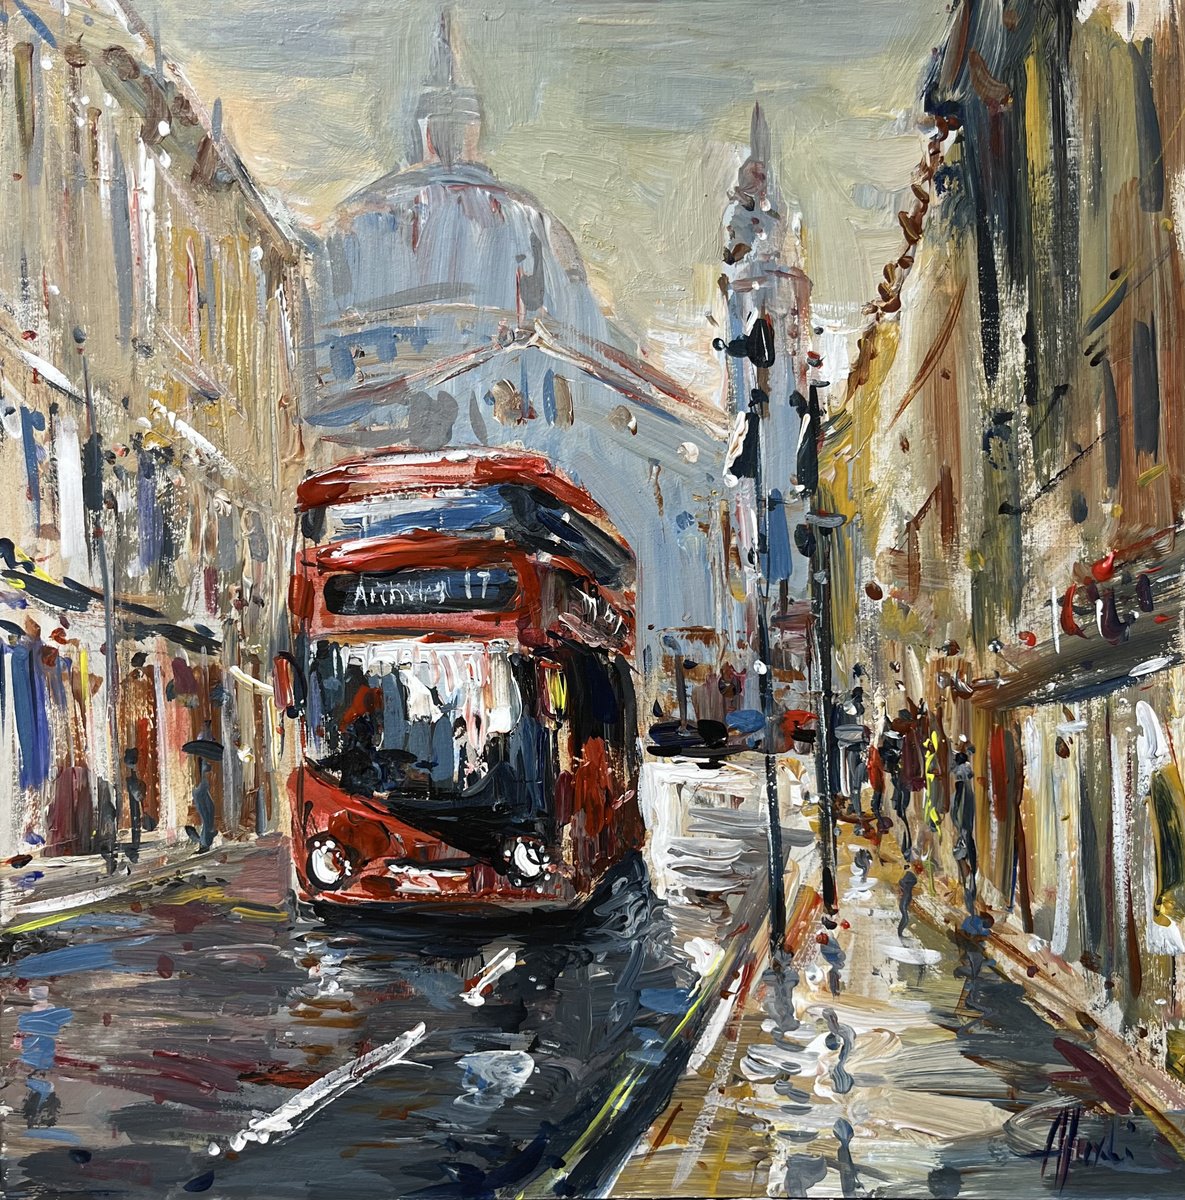 London Red Bus Route Archway, framed painting by Altin Furxhi